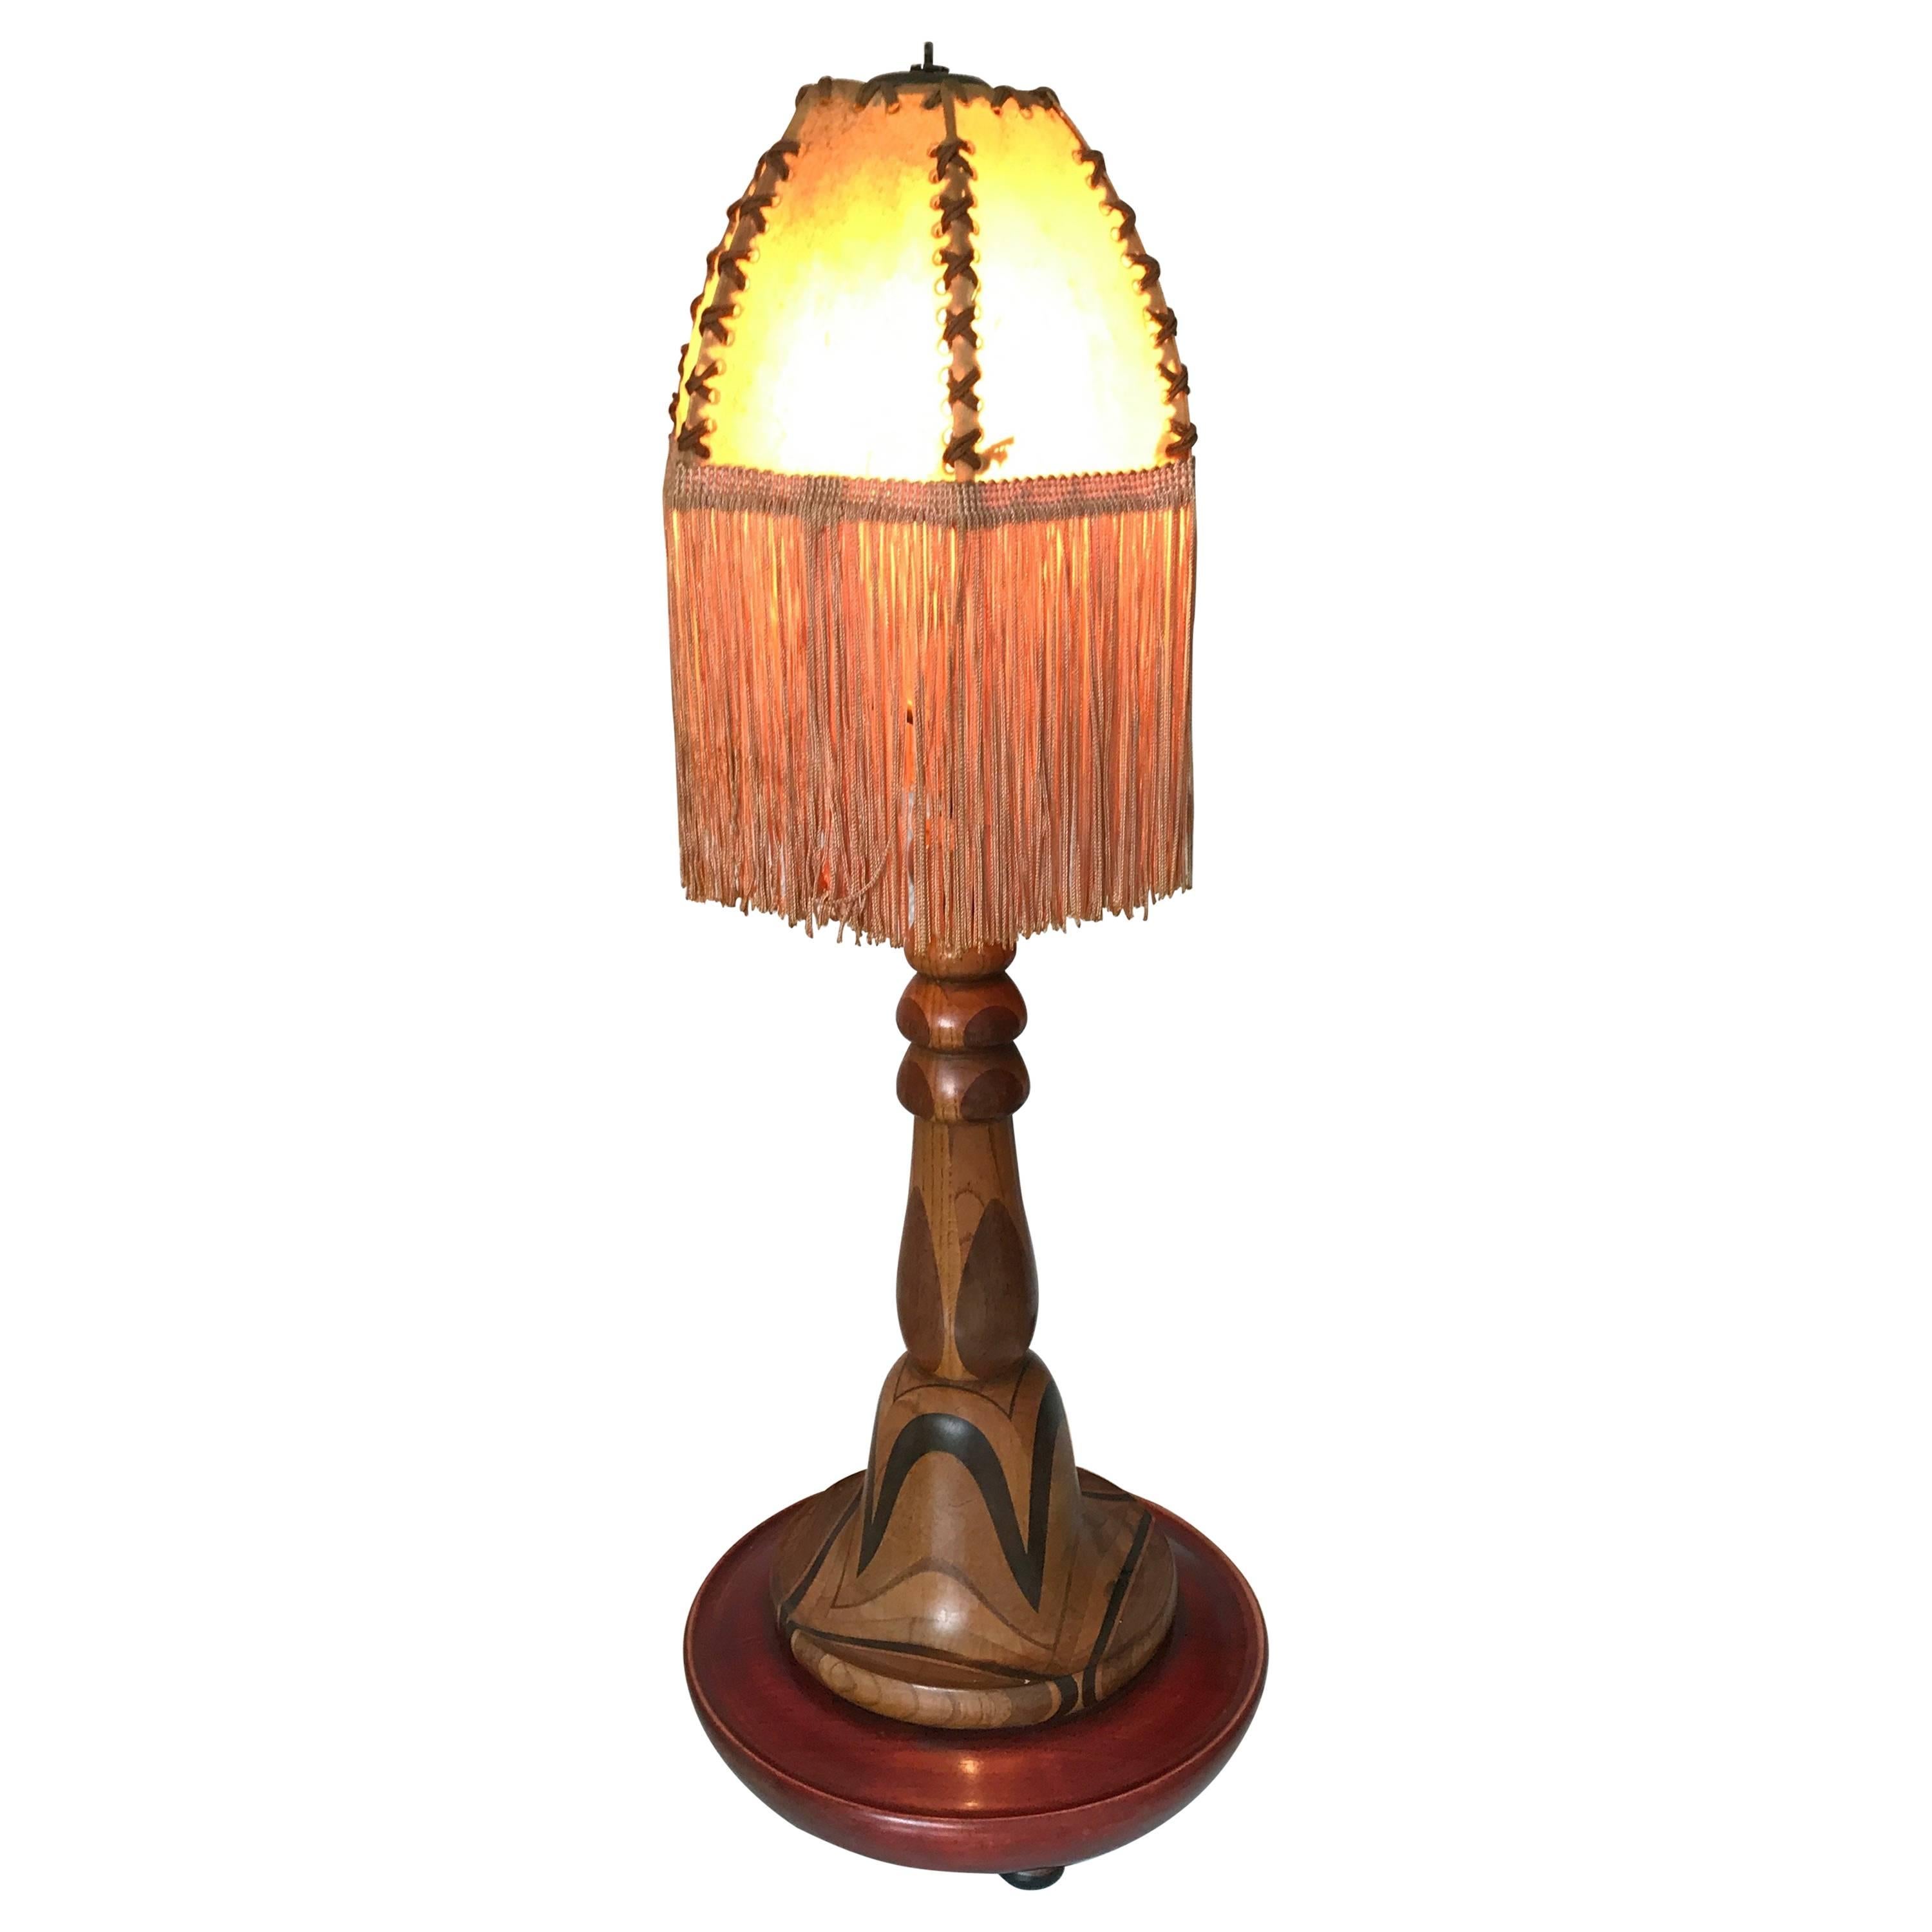 Rare and Hand-Crafted Art Deco Desk or Table Lamp with Stunning Wood Motifs For Sale